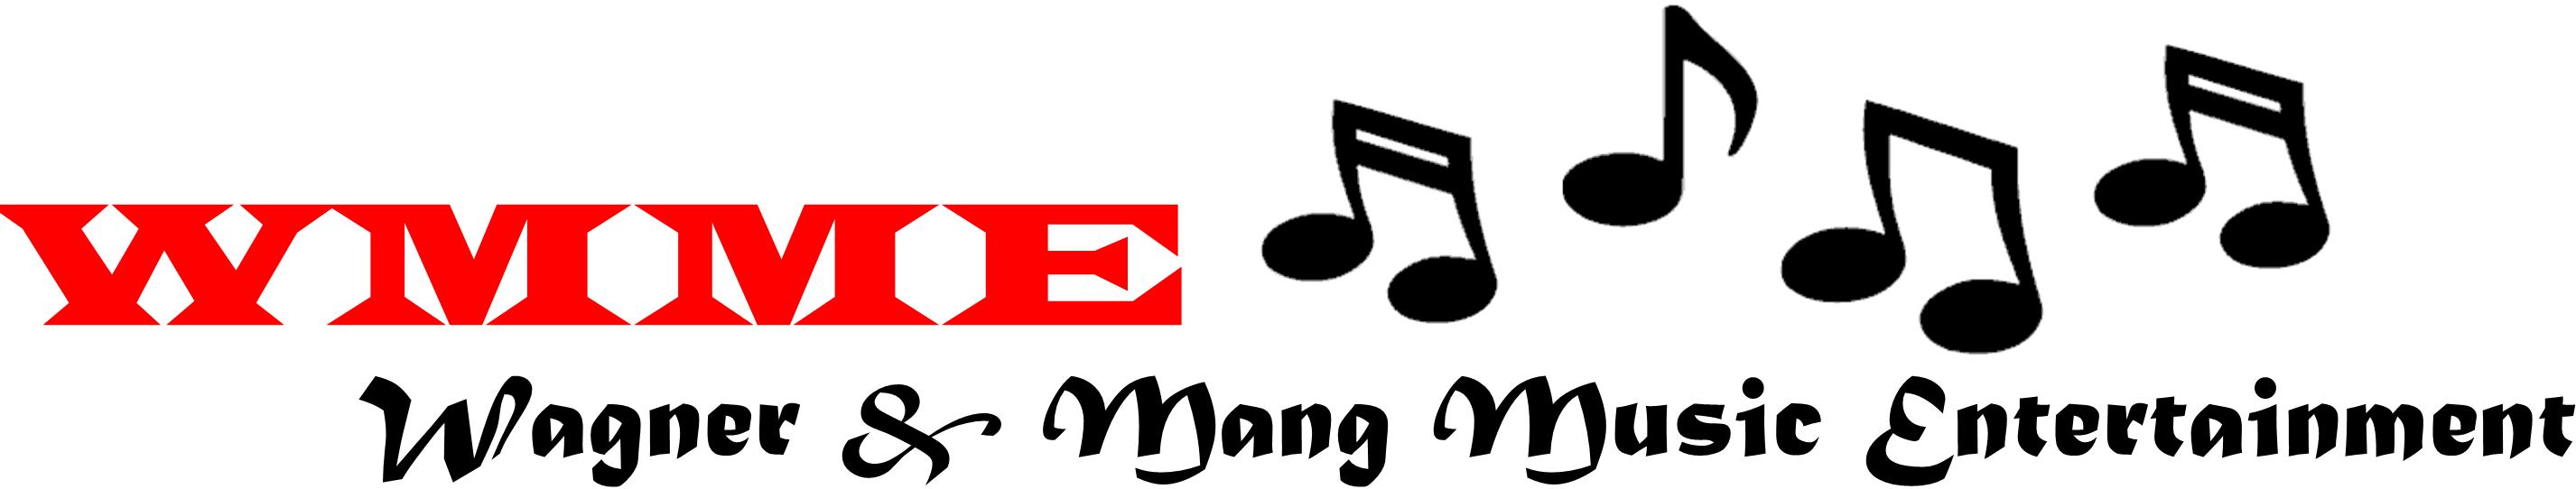 WMME - Wagner & Mang Music Entertainment